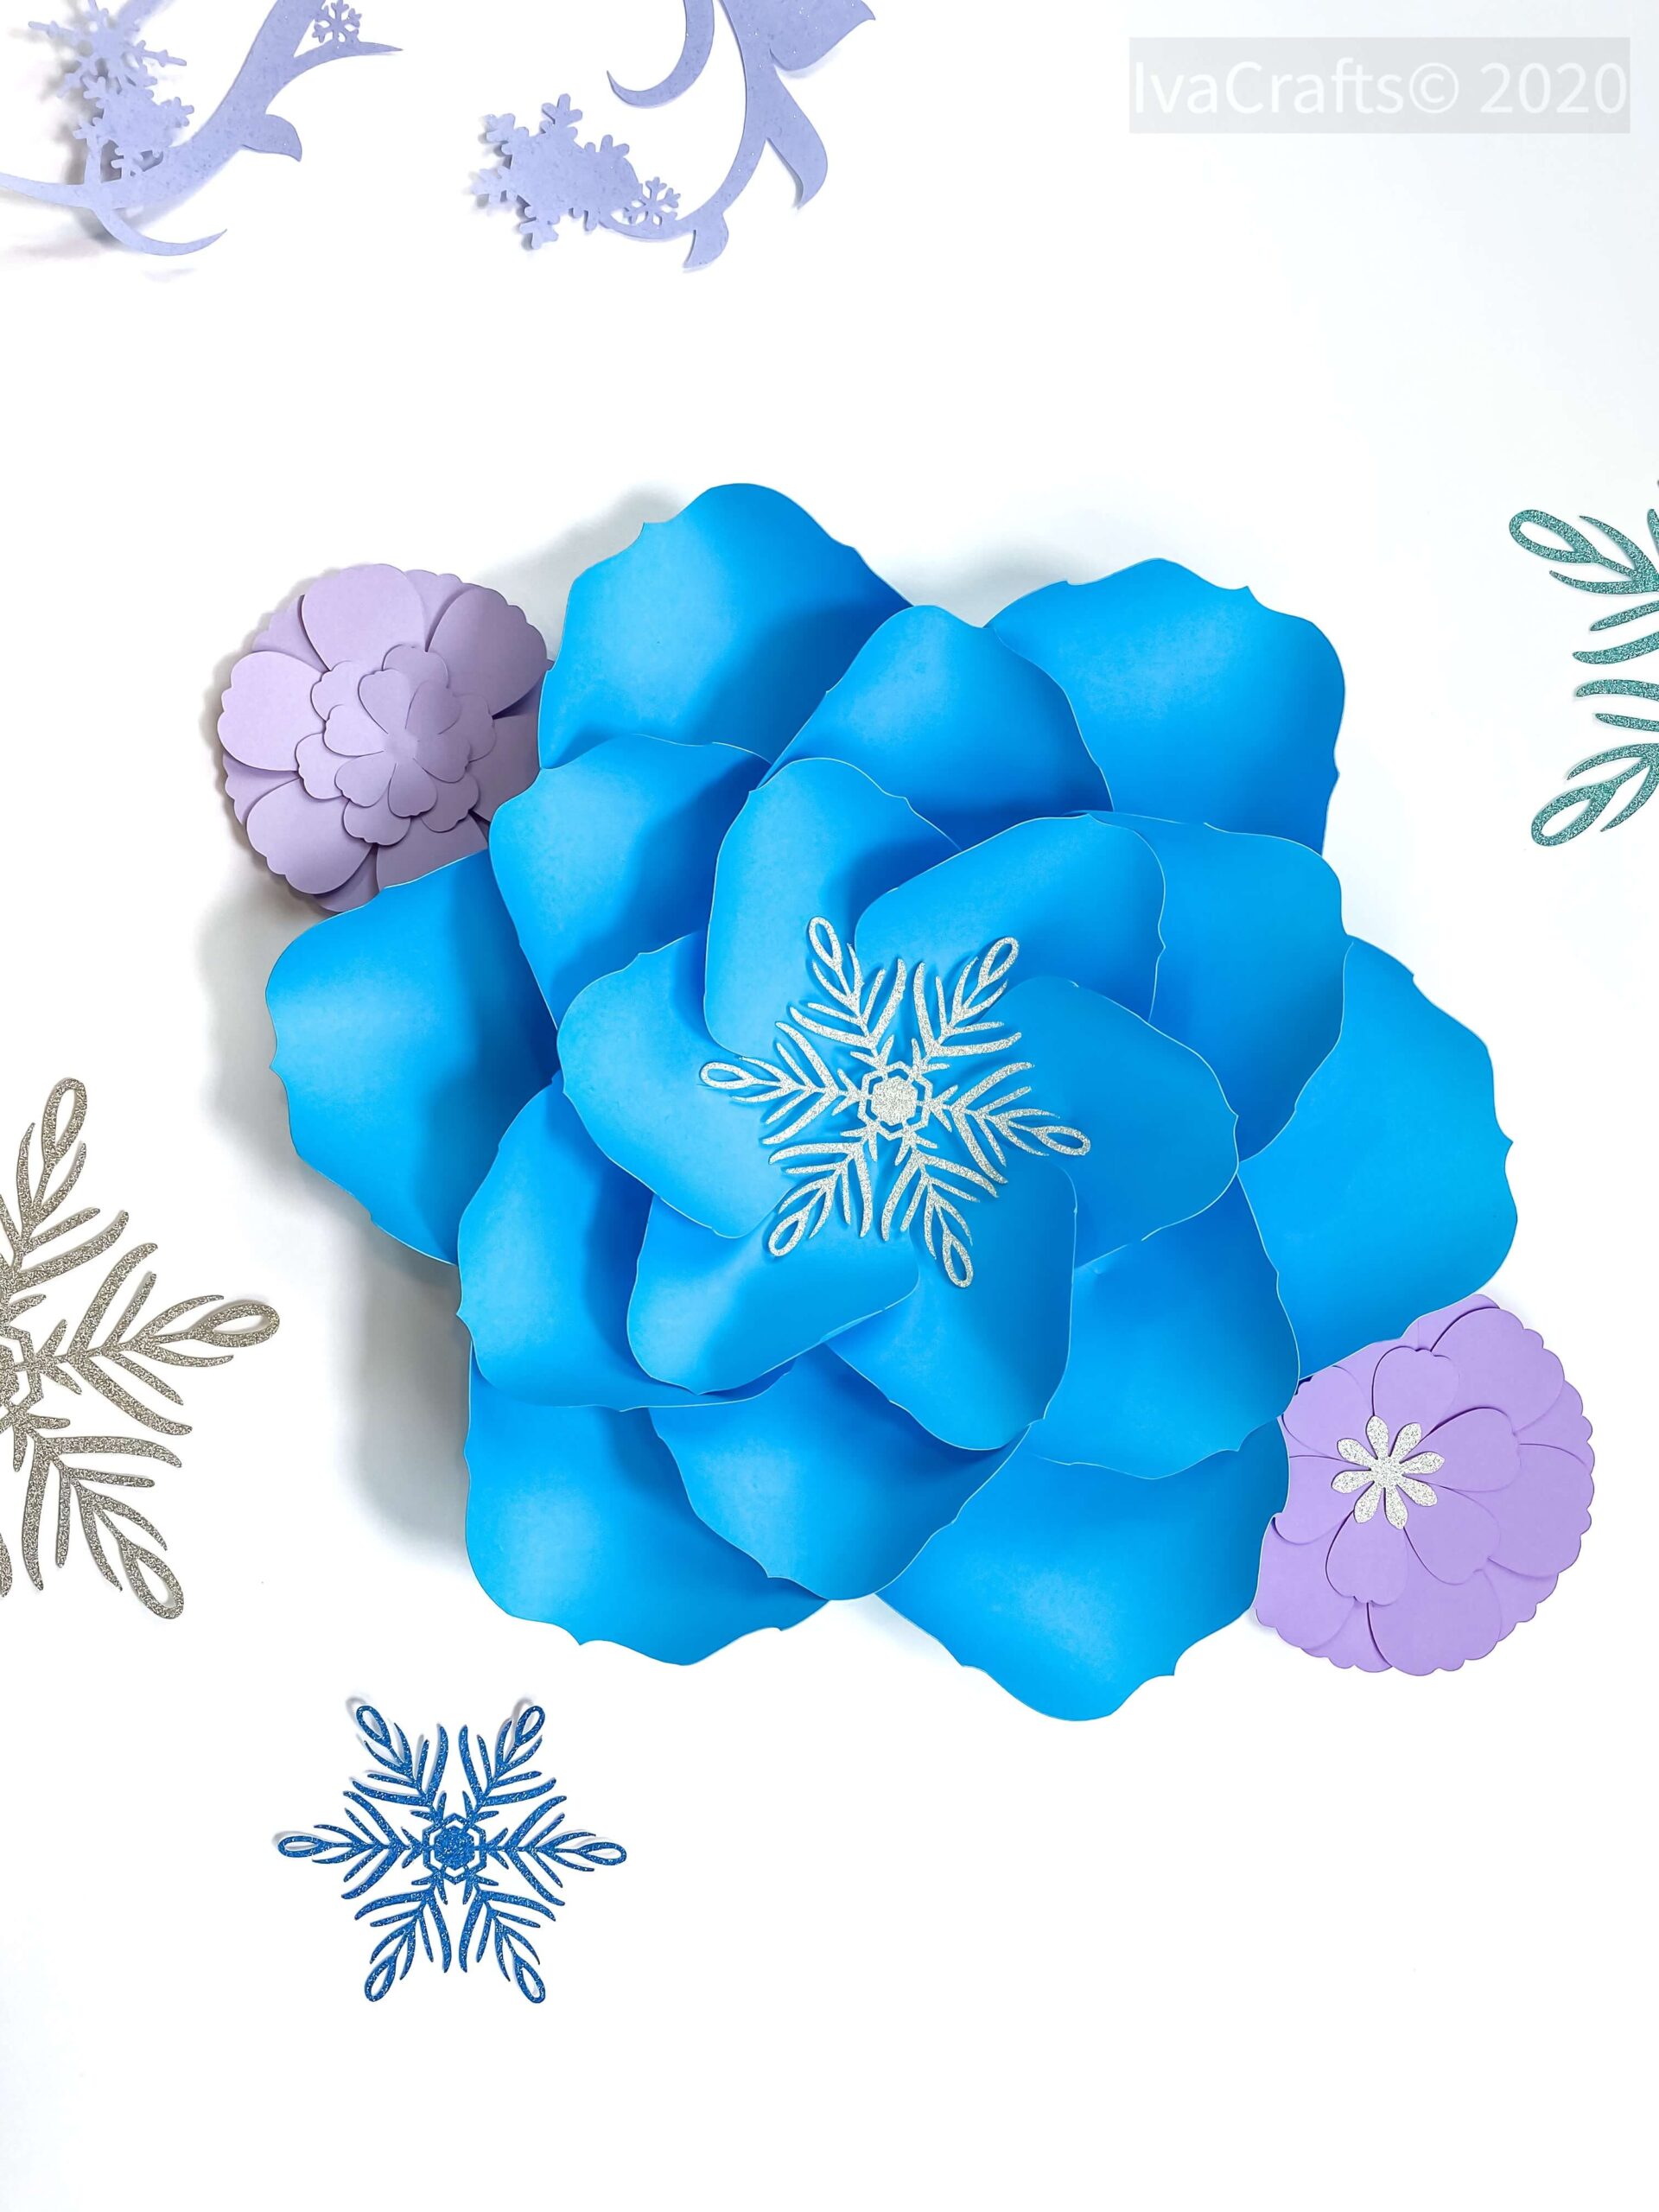 Paper Roses frozen Set of Blue, Silver and White Floral Paper Flowers, Blue  Paper Flowers, Handmade Paper Roses, Paper Embellishments 